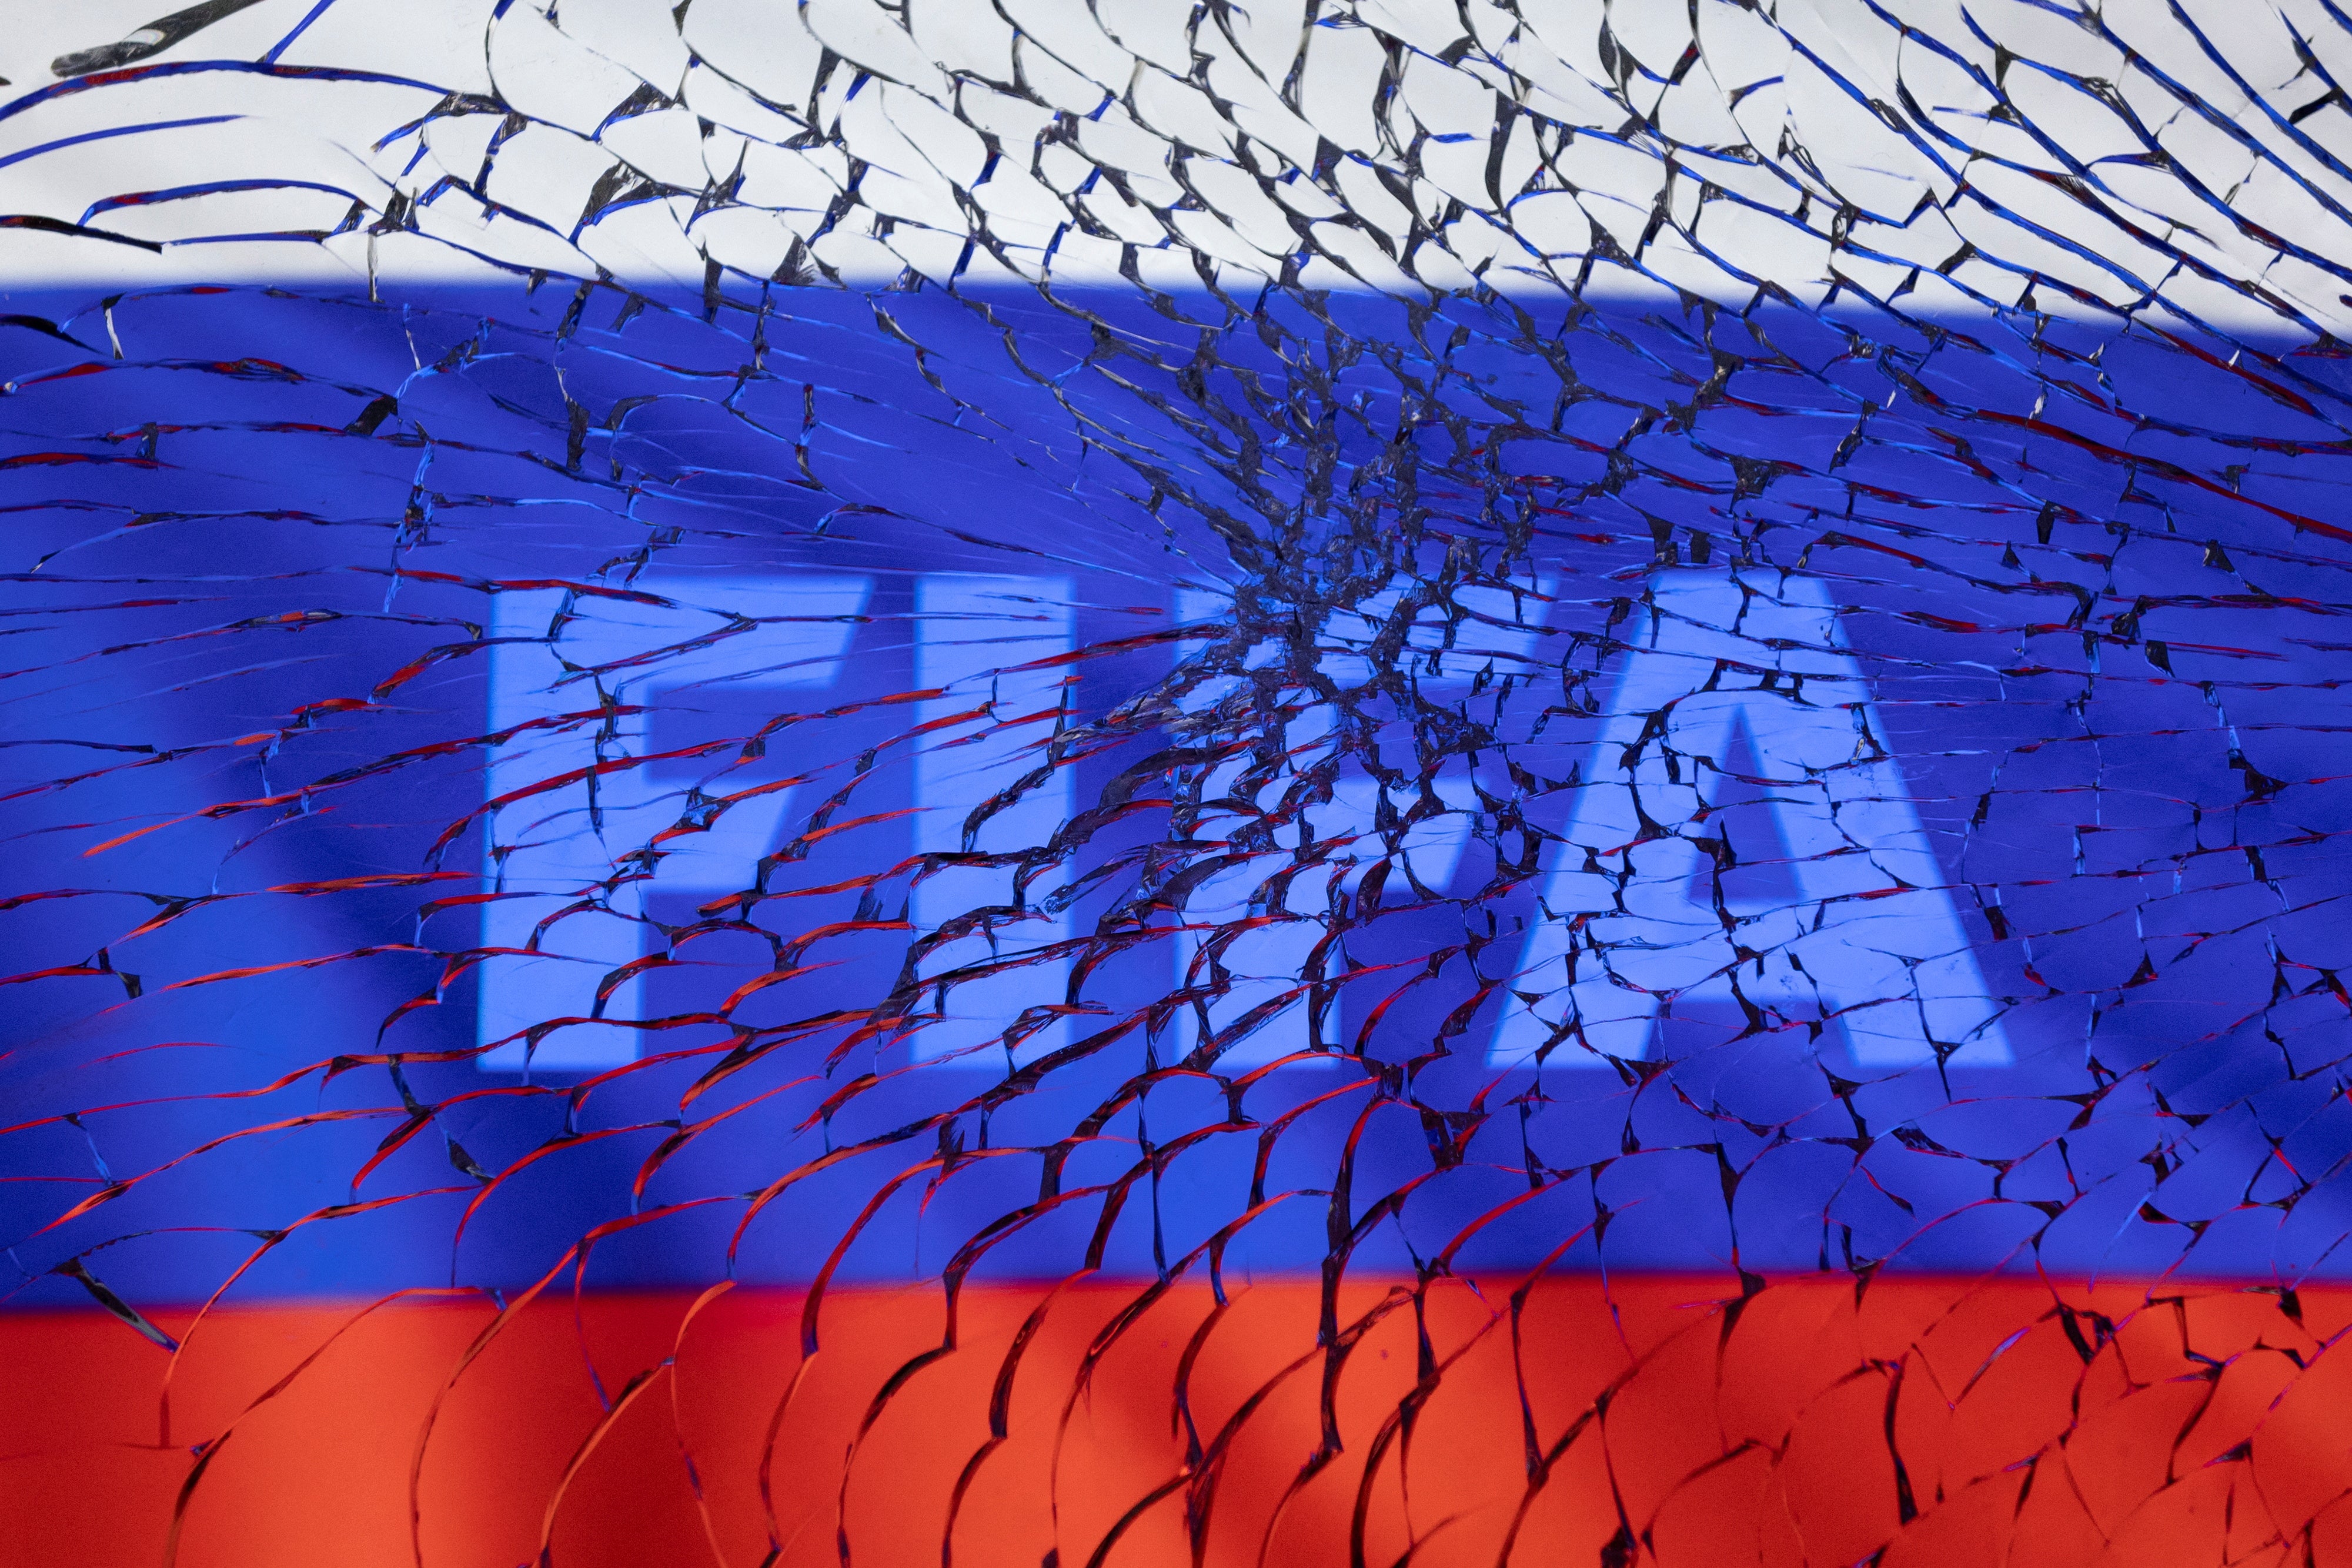 FIFA has banned Russian national teams from international competitions